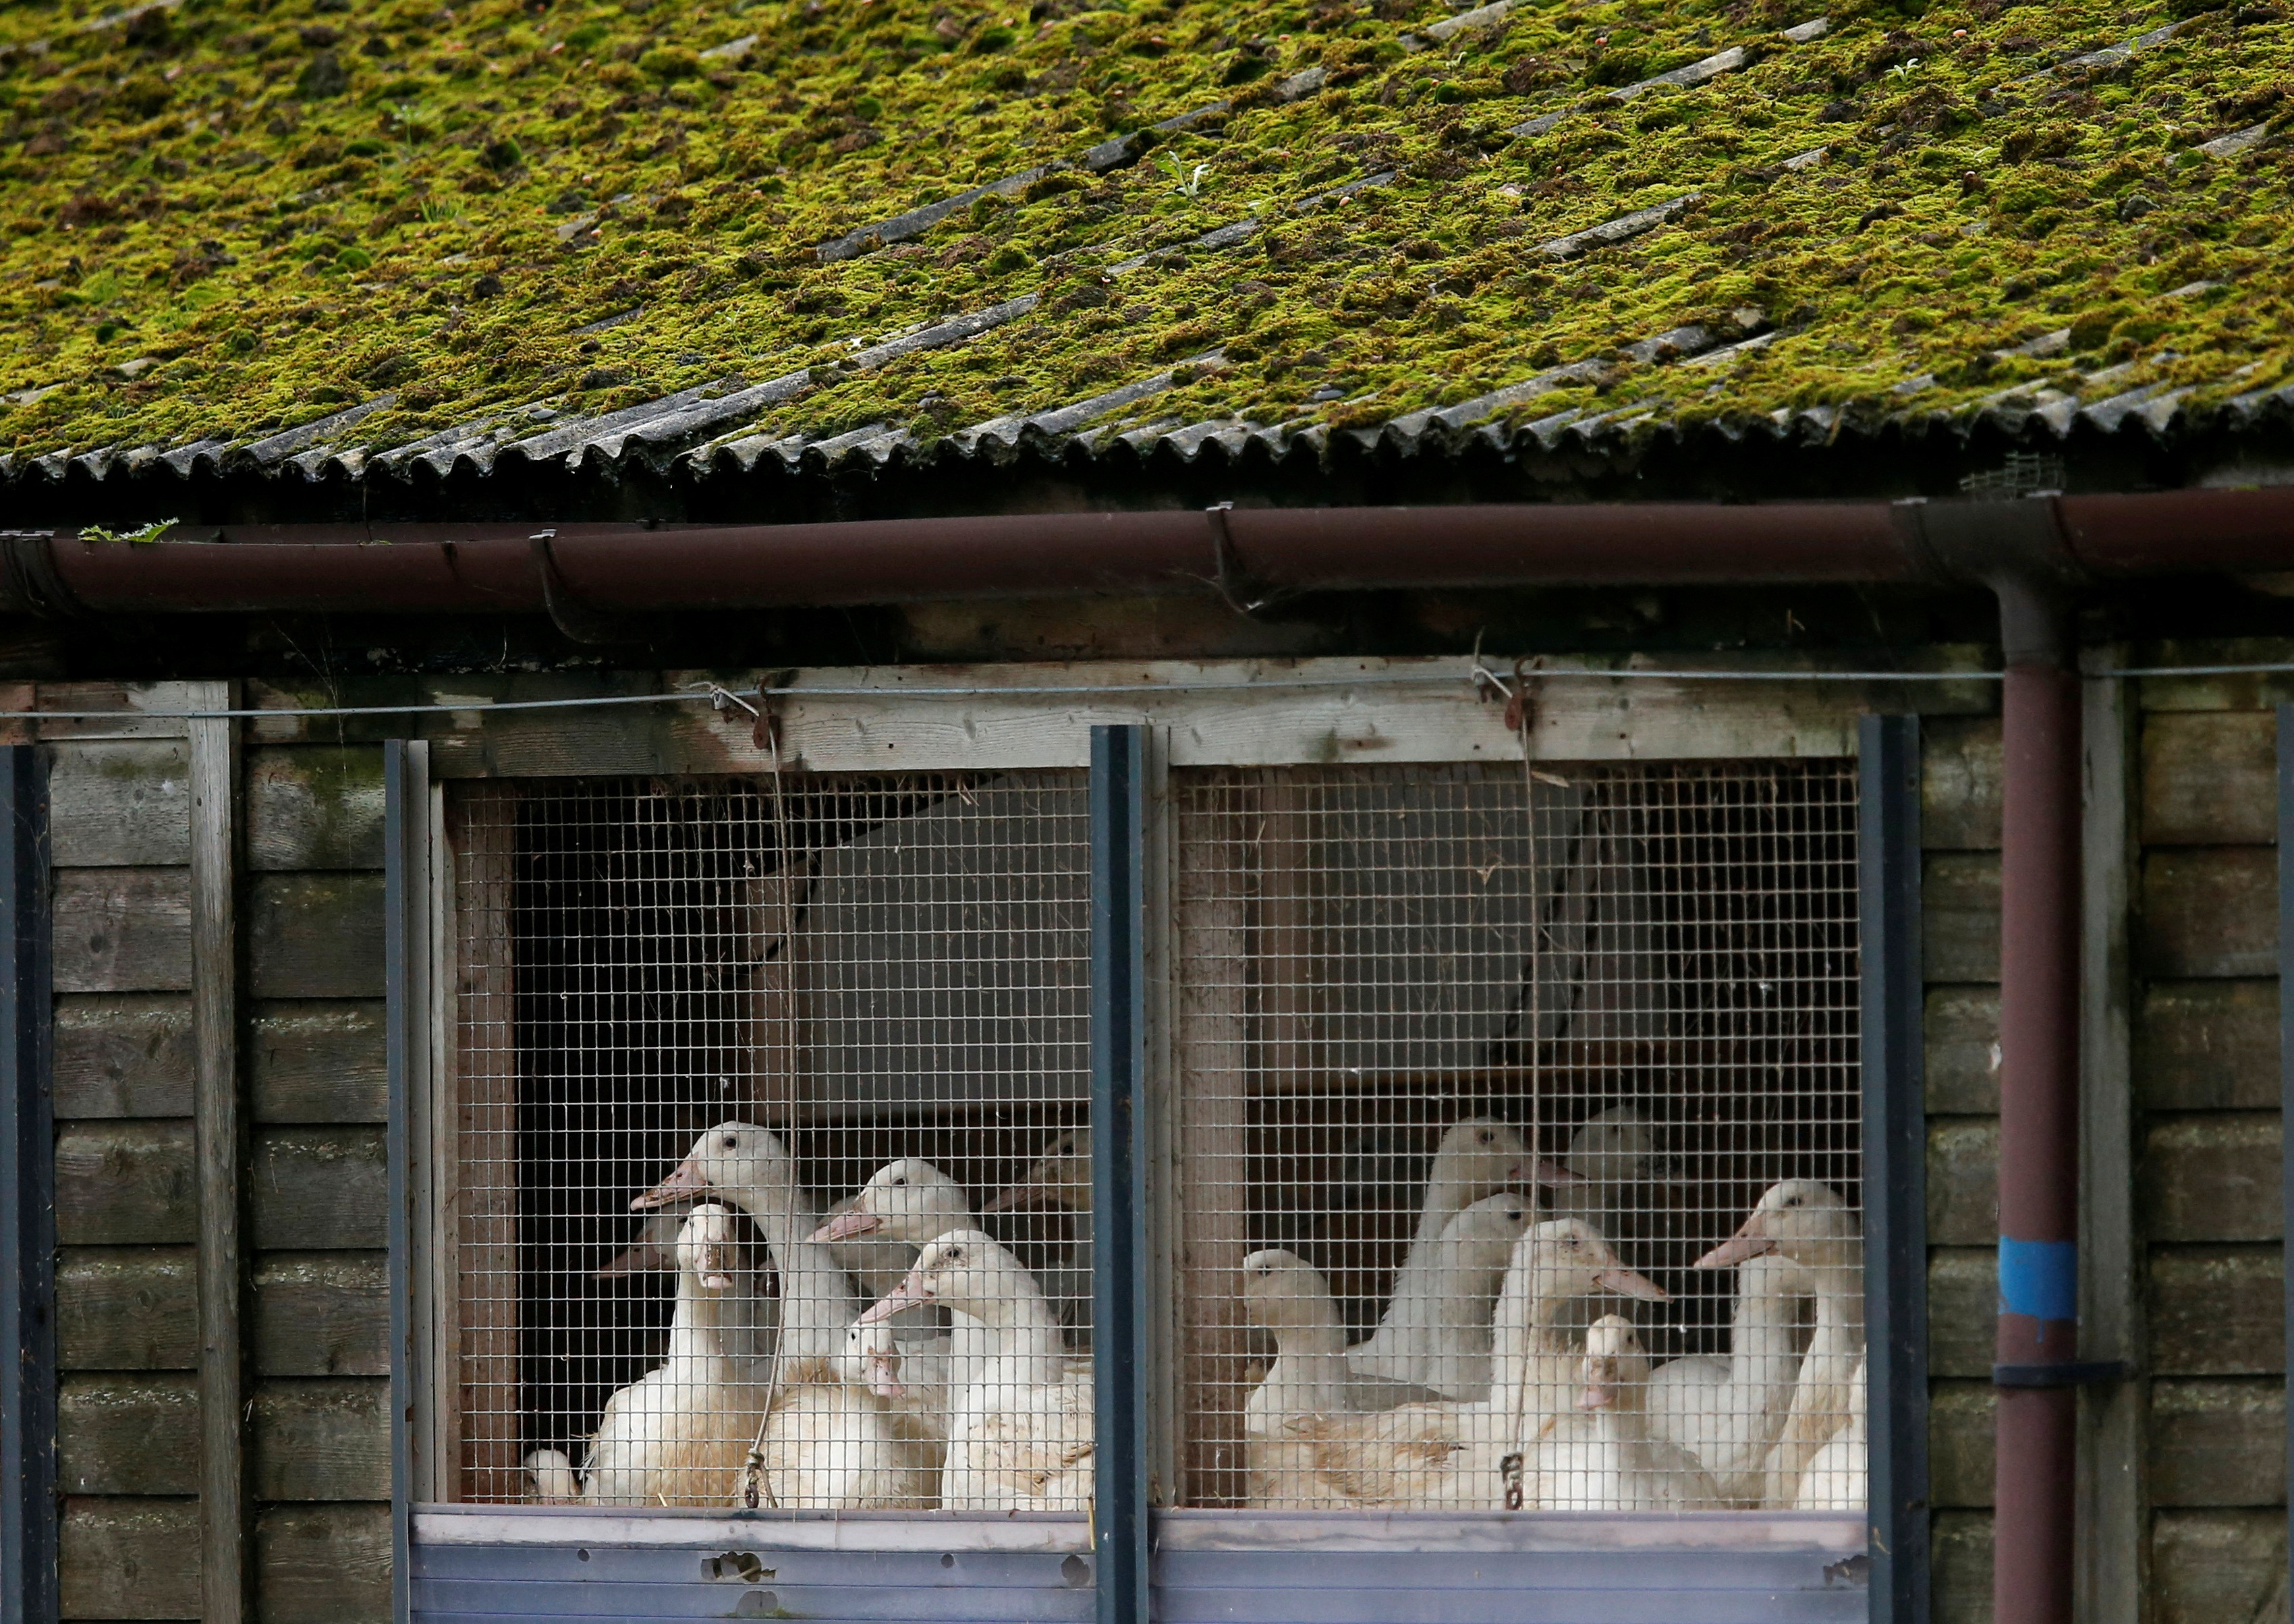 Ducks in cages are seen at a duck farm in Nafferton, Britain